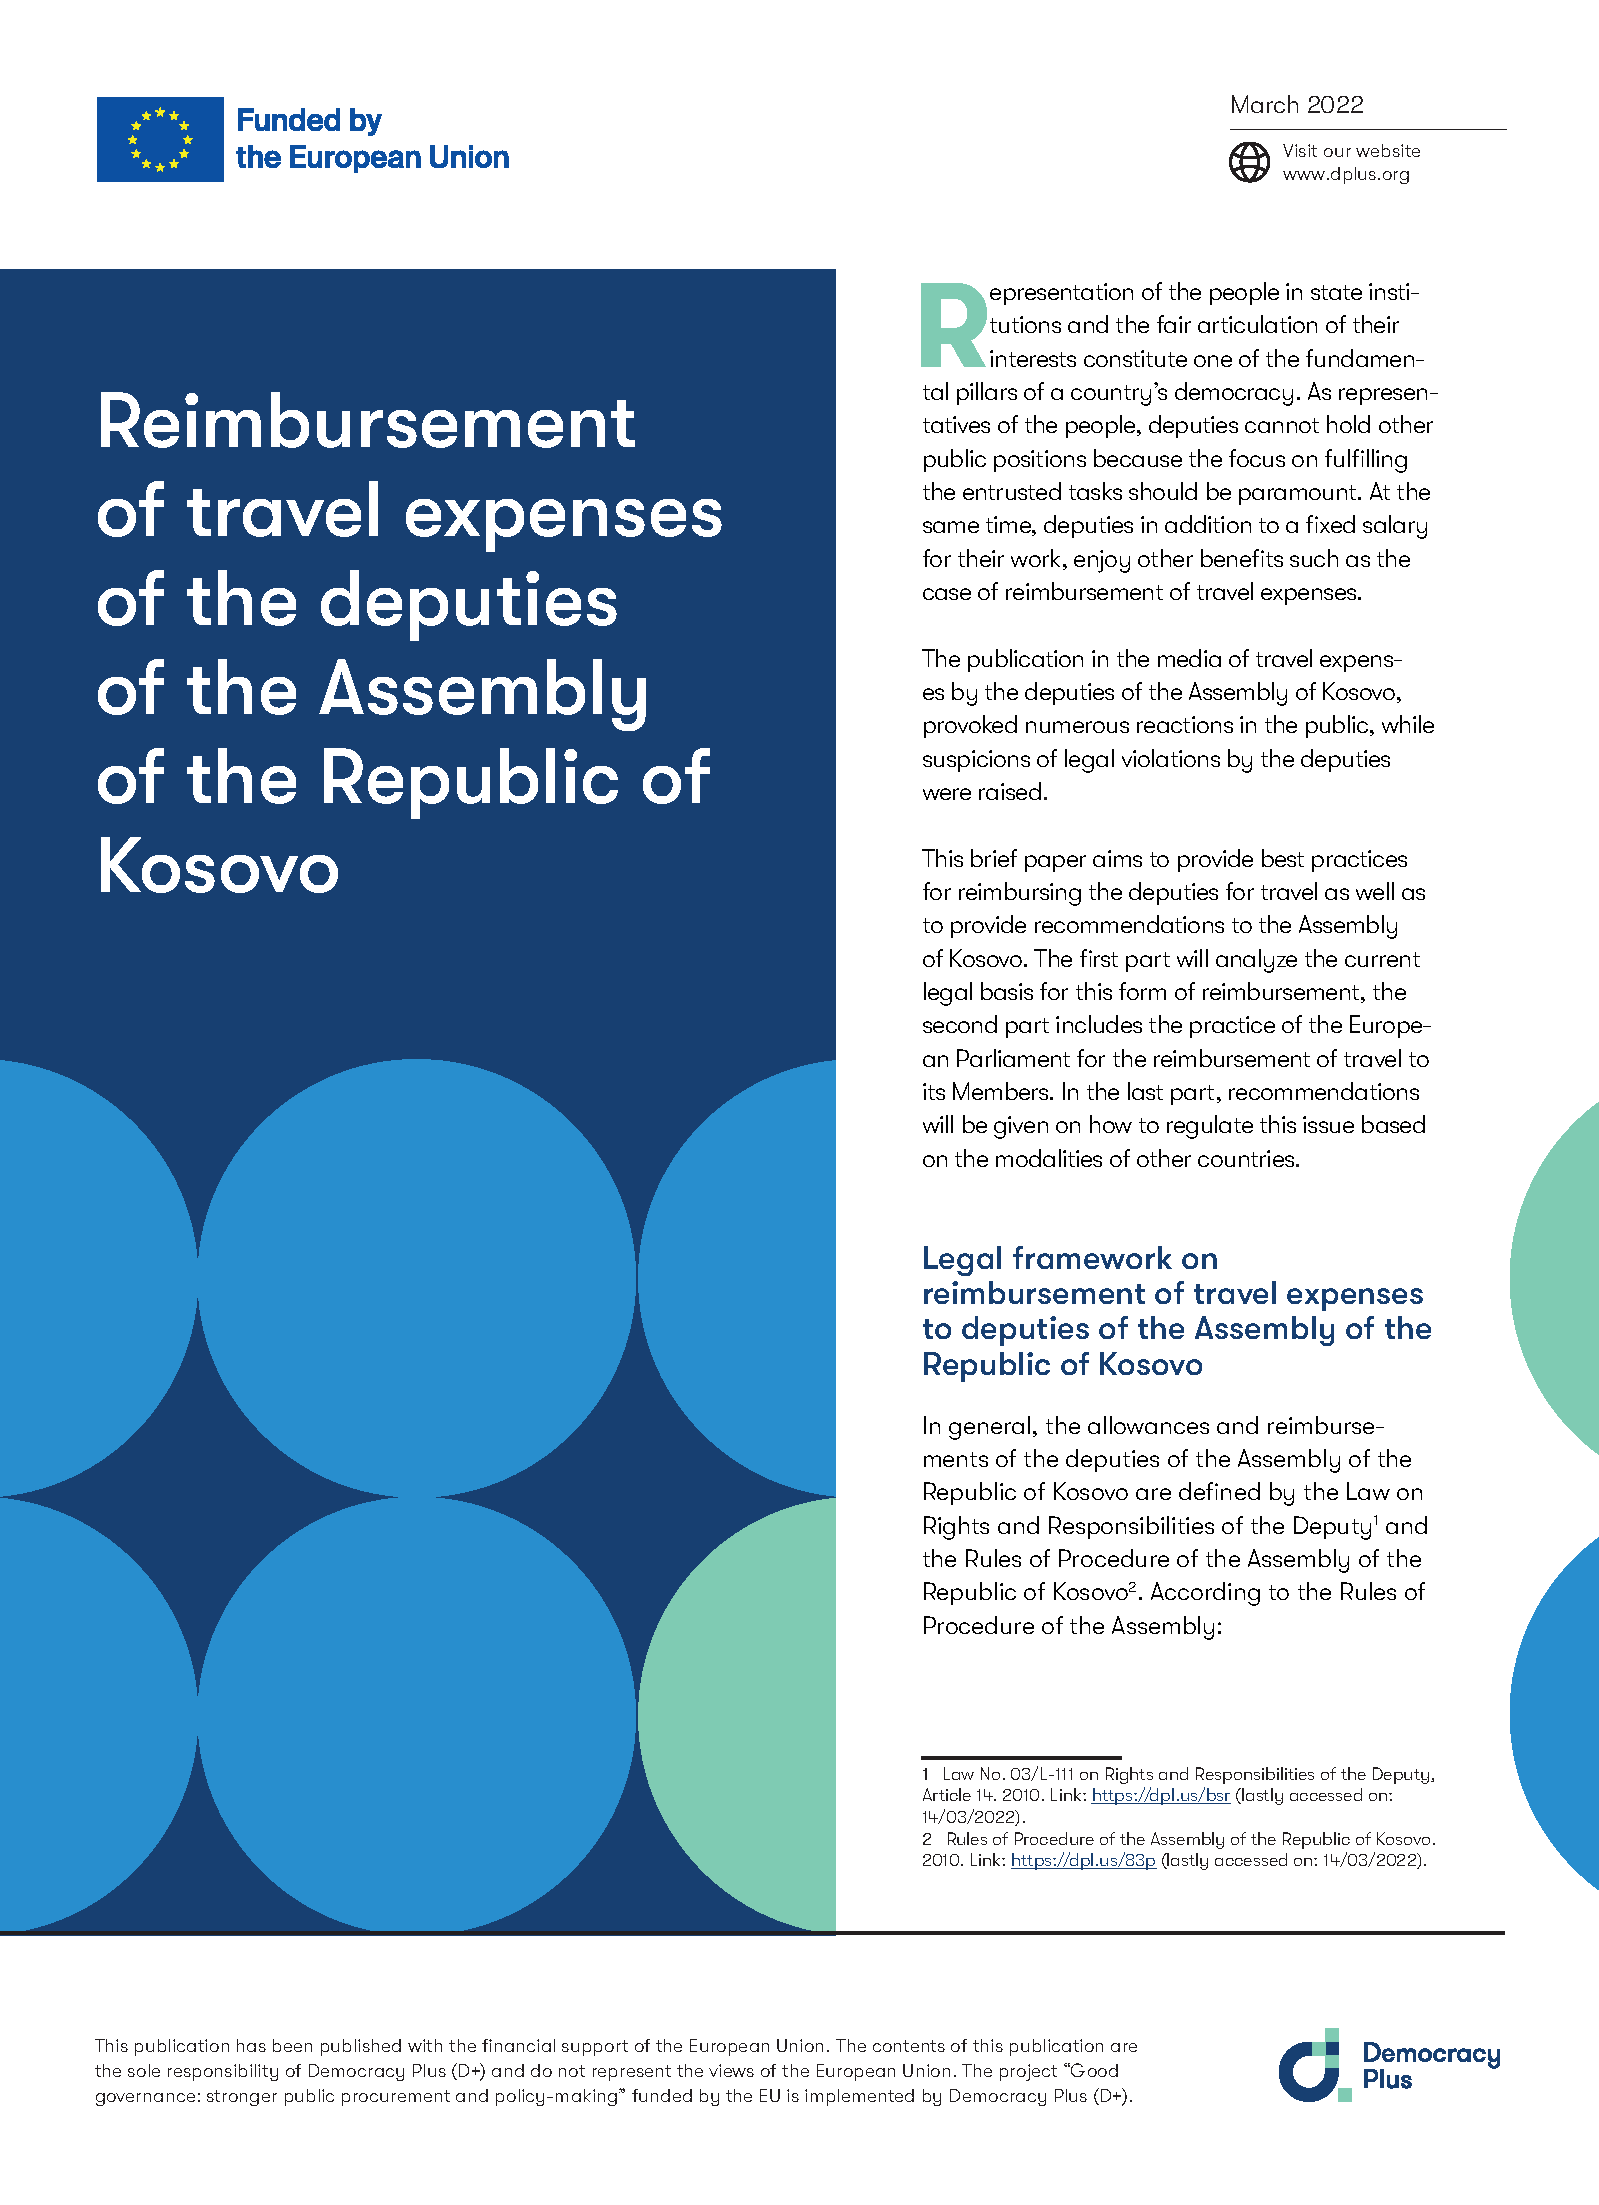 Reimbursement of travel expenses of the deputies of the Assembly of the Republic of Kosovo